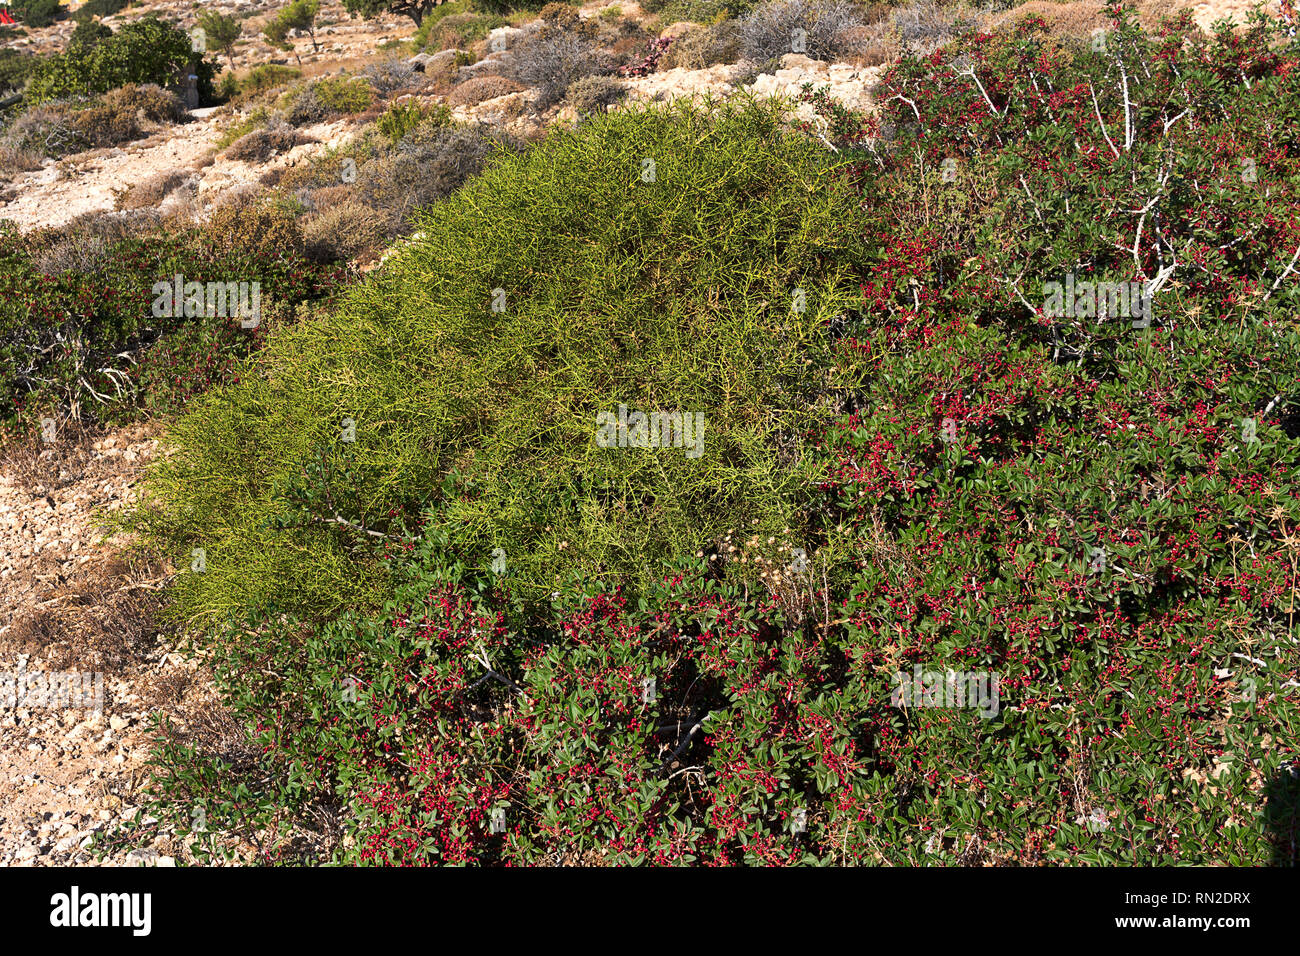 Pistacia lentiscus or mastic, Red fruits and leaves - Karpathos island, Greece Stock Photo